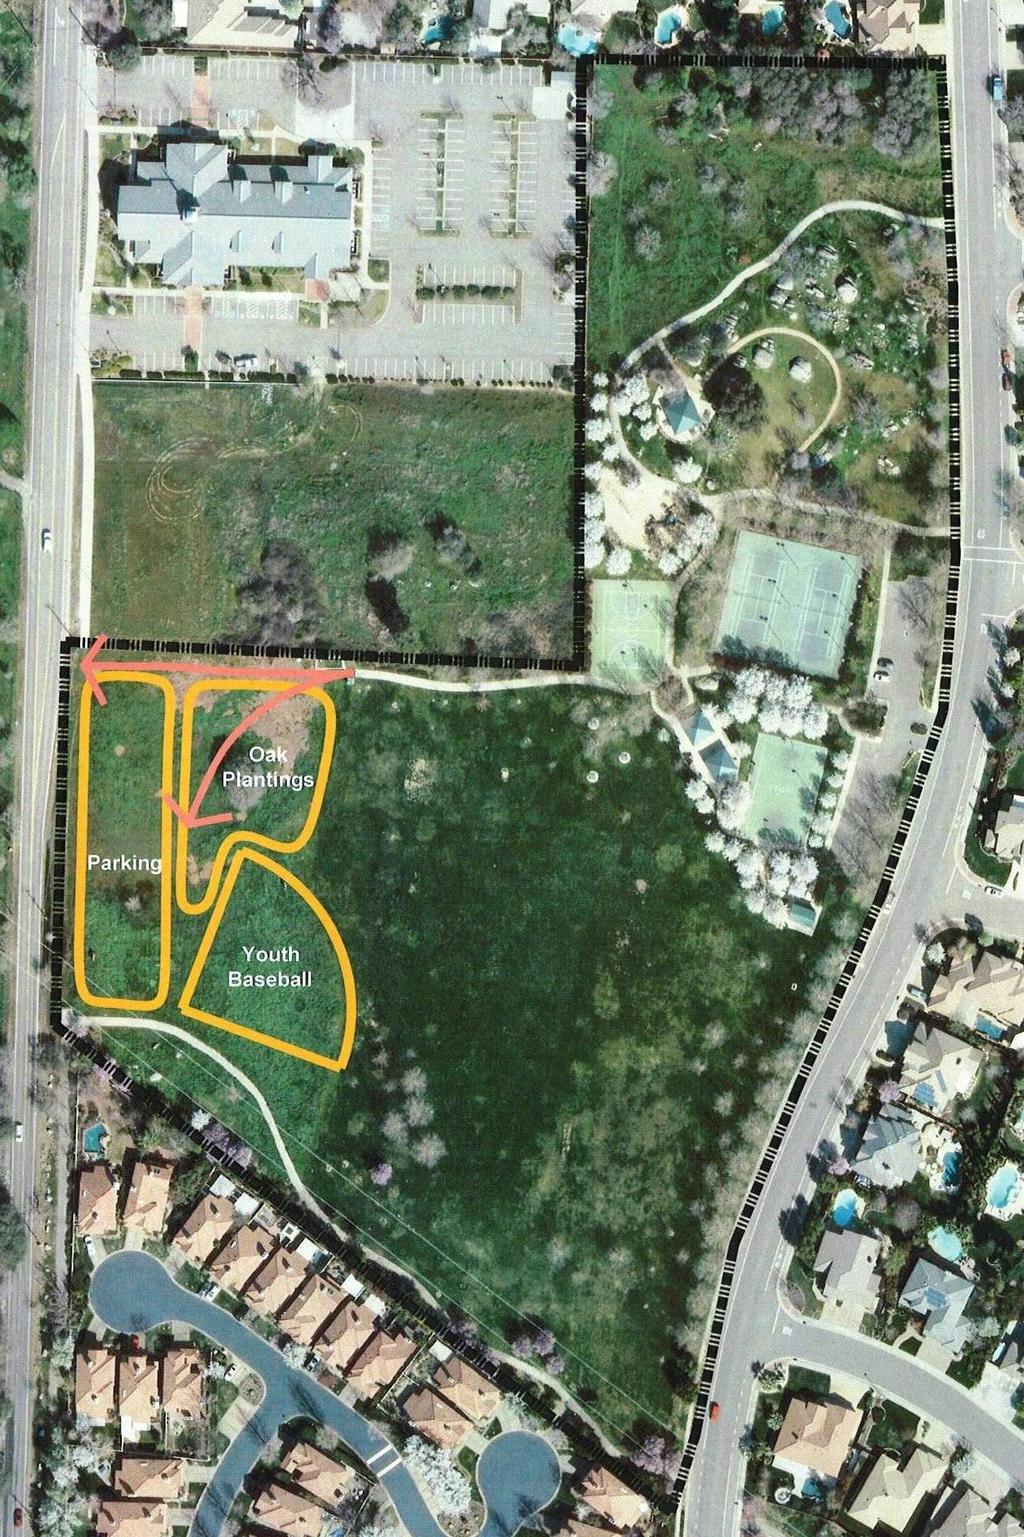 Bud and Artie Davies Park Programmed Facilities from the 2002 Master Plan Implementation Plan Update Developed Facilities 2003-2013 2014 Master Plan Recommendation Cost Acres (5.0) - 2 Ac.